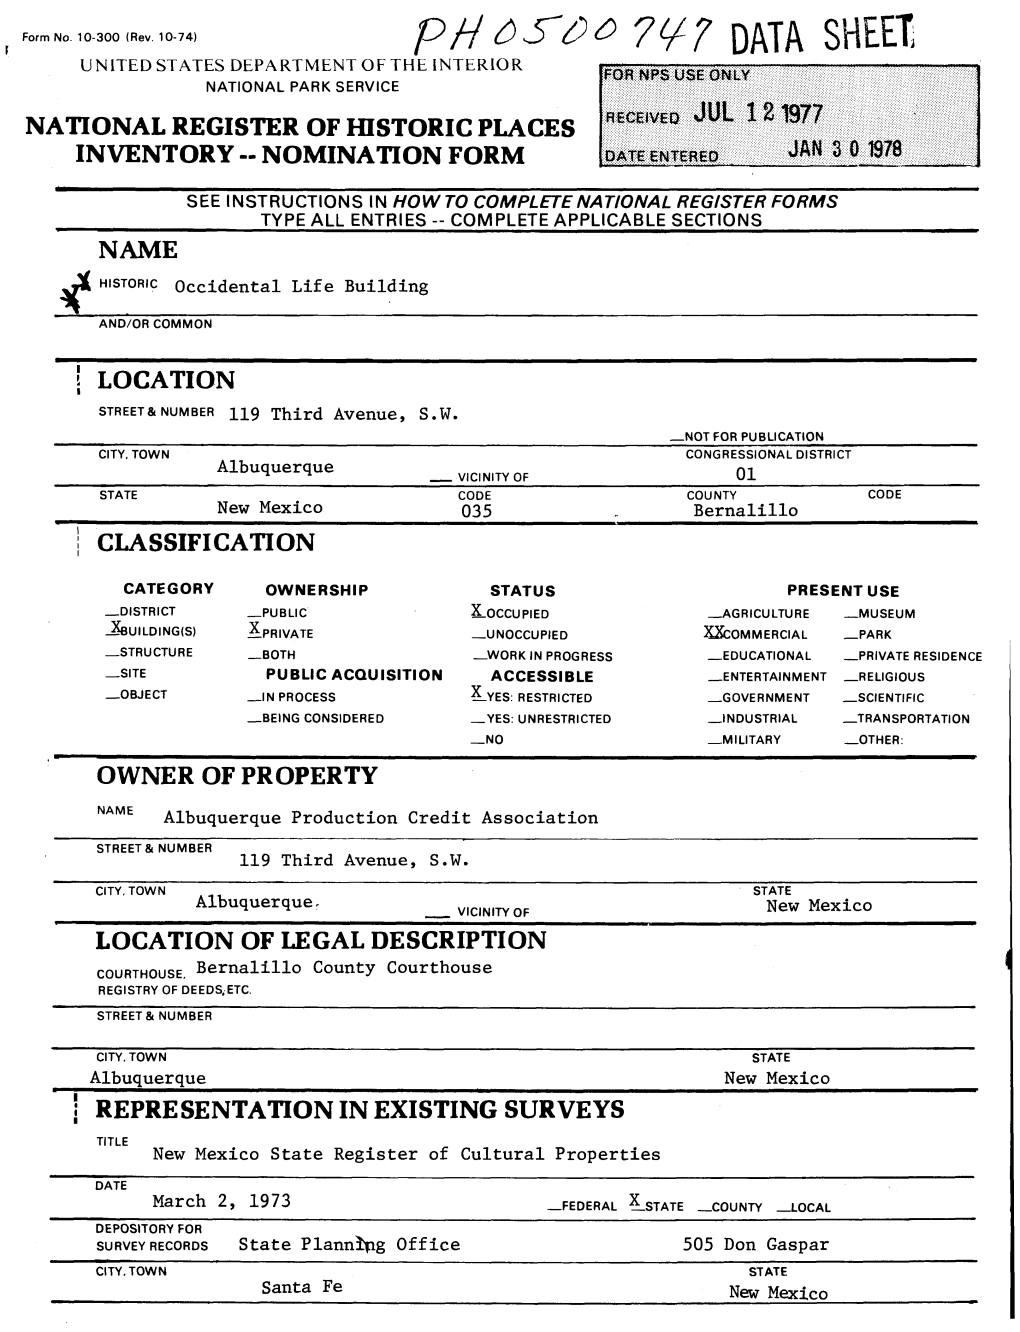 Data Sheet United States Department of the Interior National Park Service National Register of Historic Places Inventory -- Nomination Form